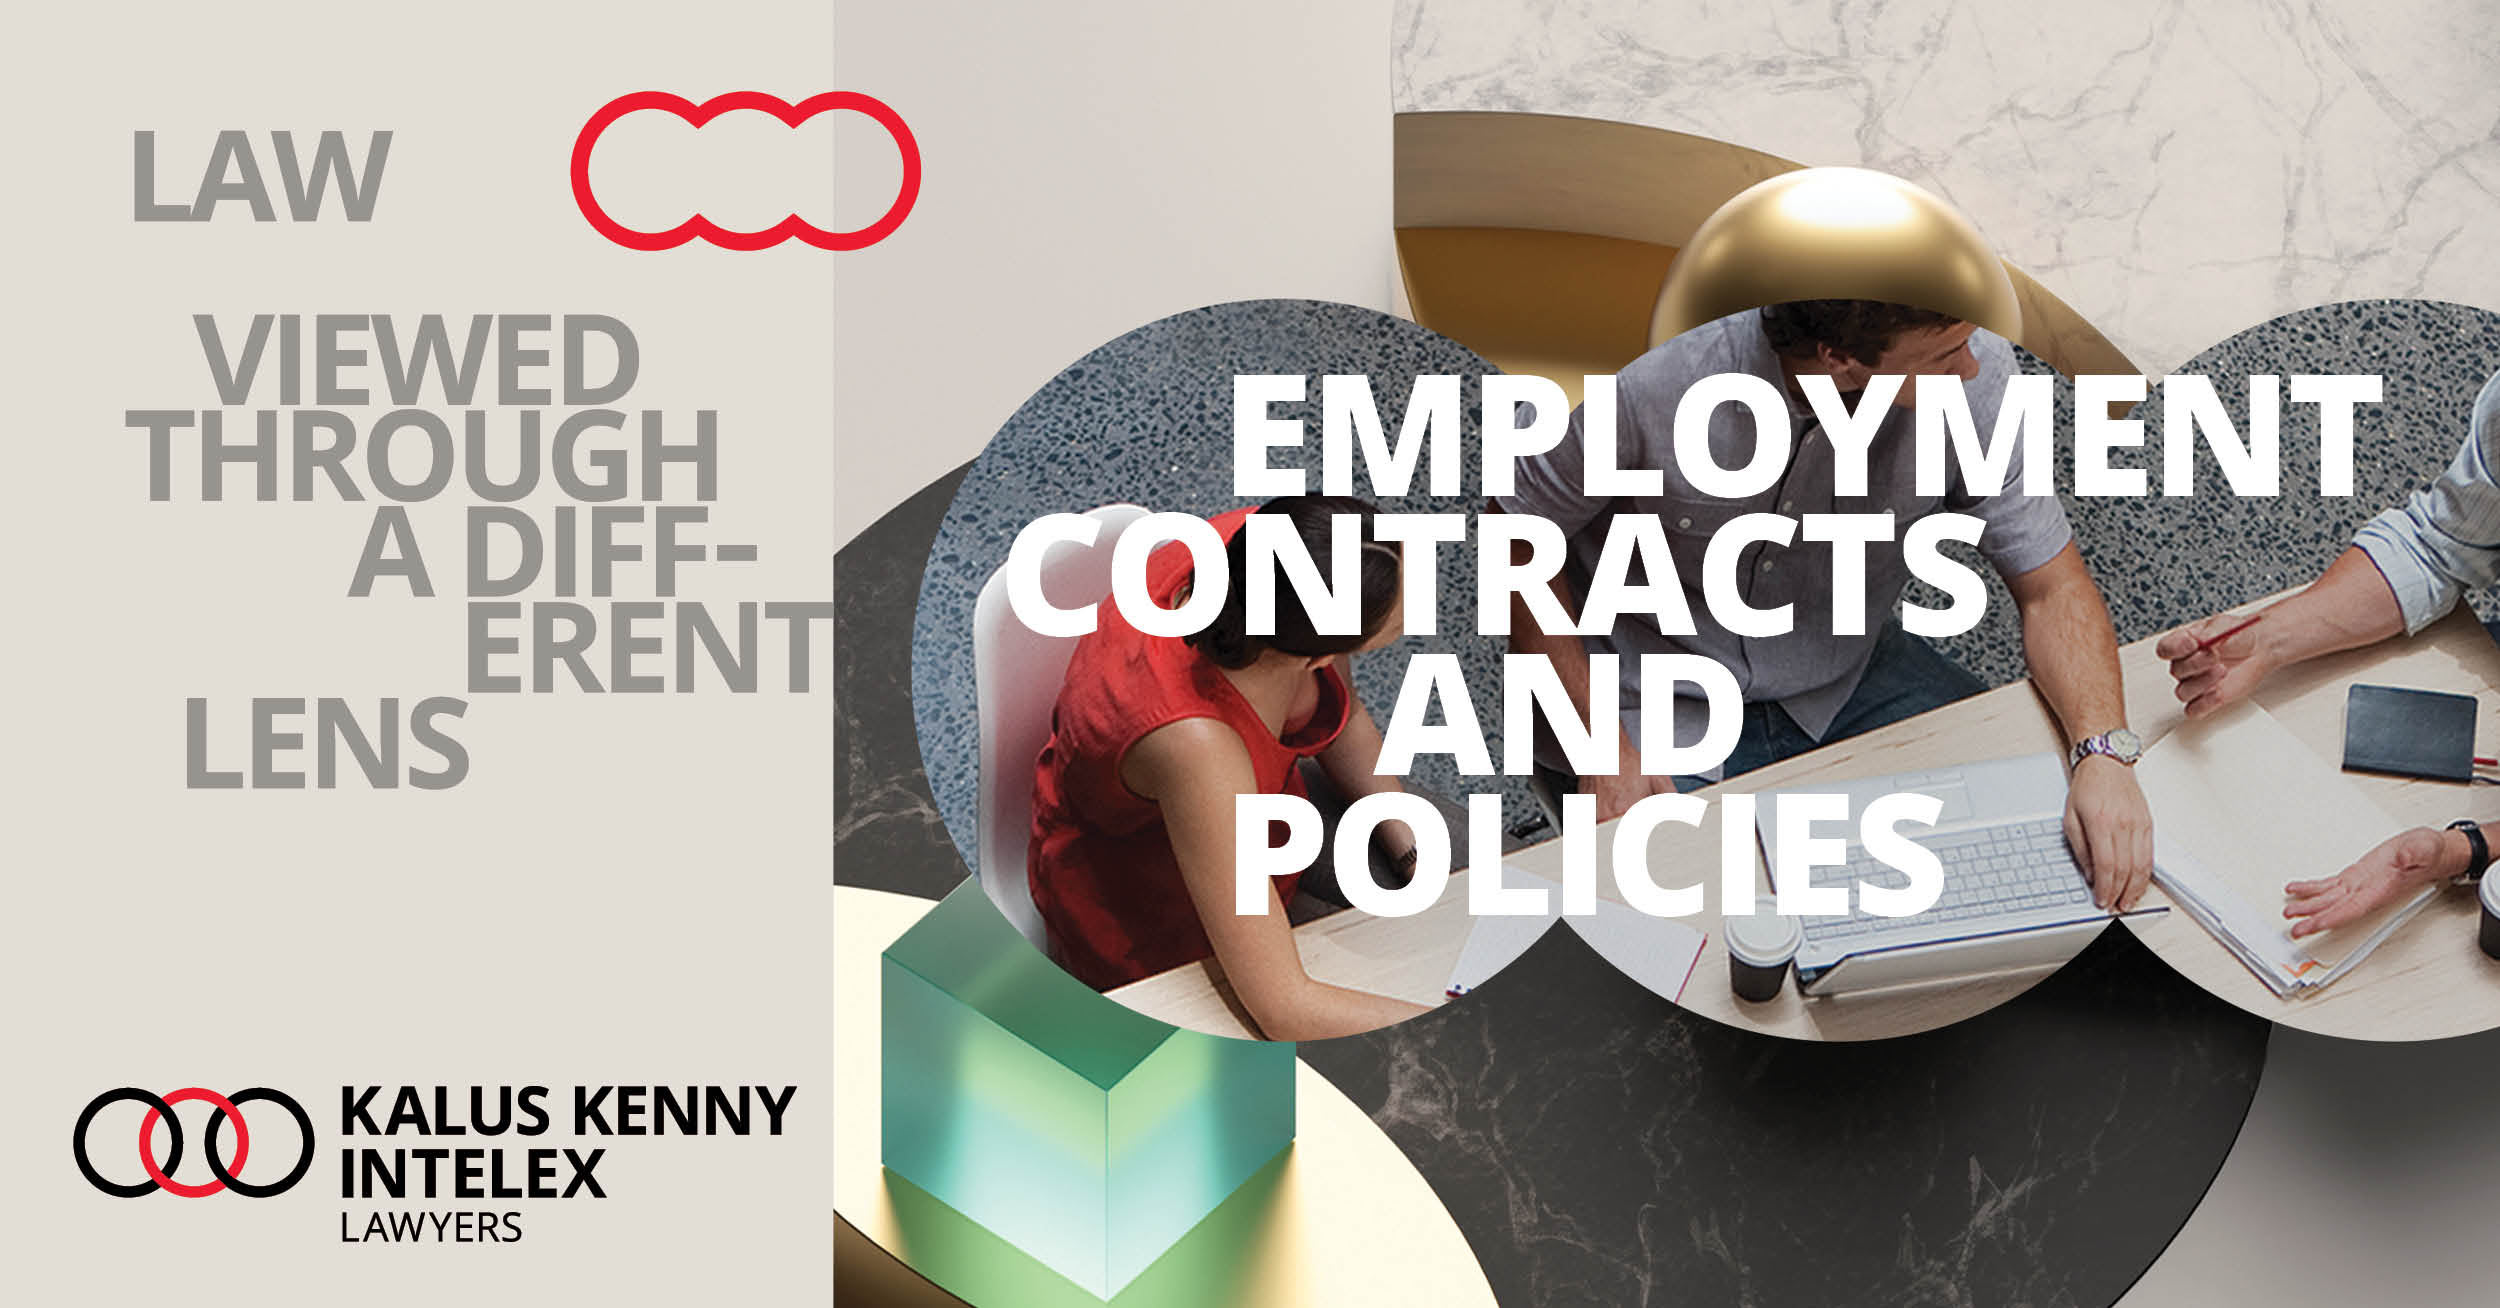 Have you reviewed your employment contracts and policies recently?